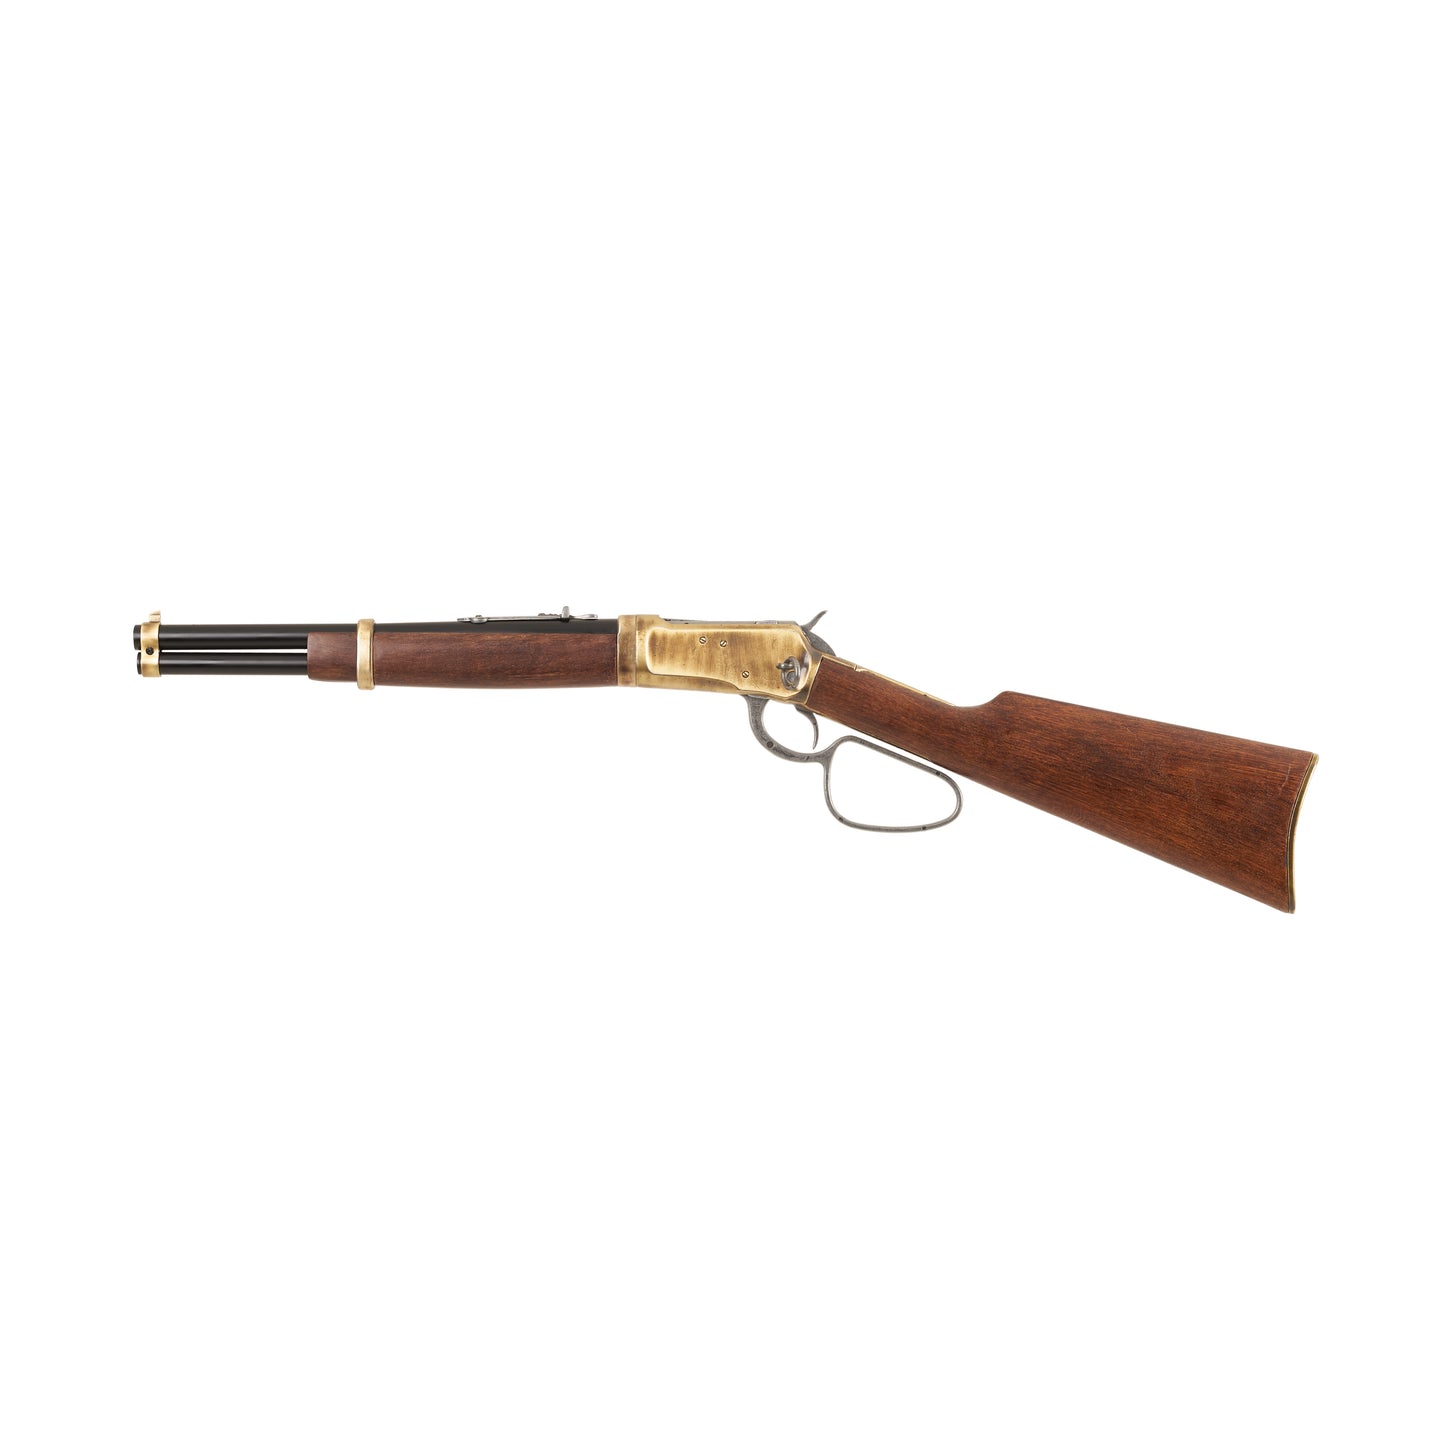 Right side view of 1892 Old West Rifle with gray loop lever, brass mechanism and fittings, wood stock, and black barrel.